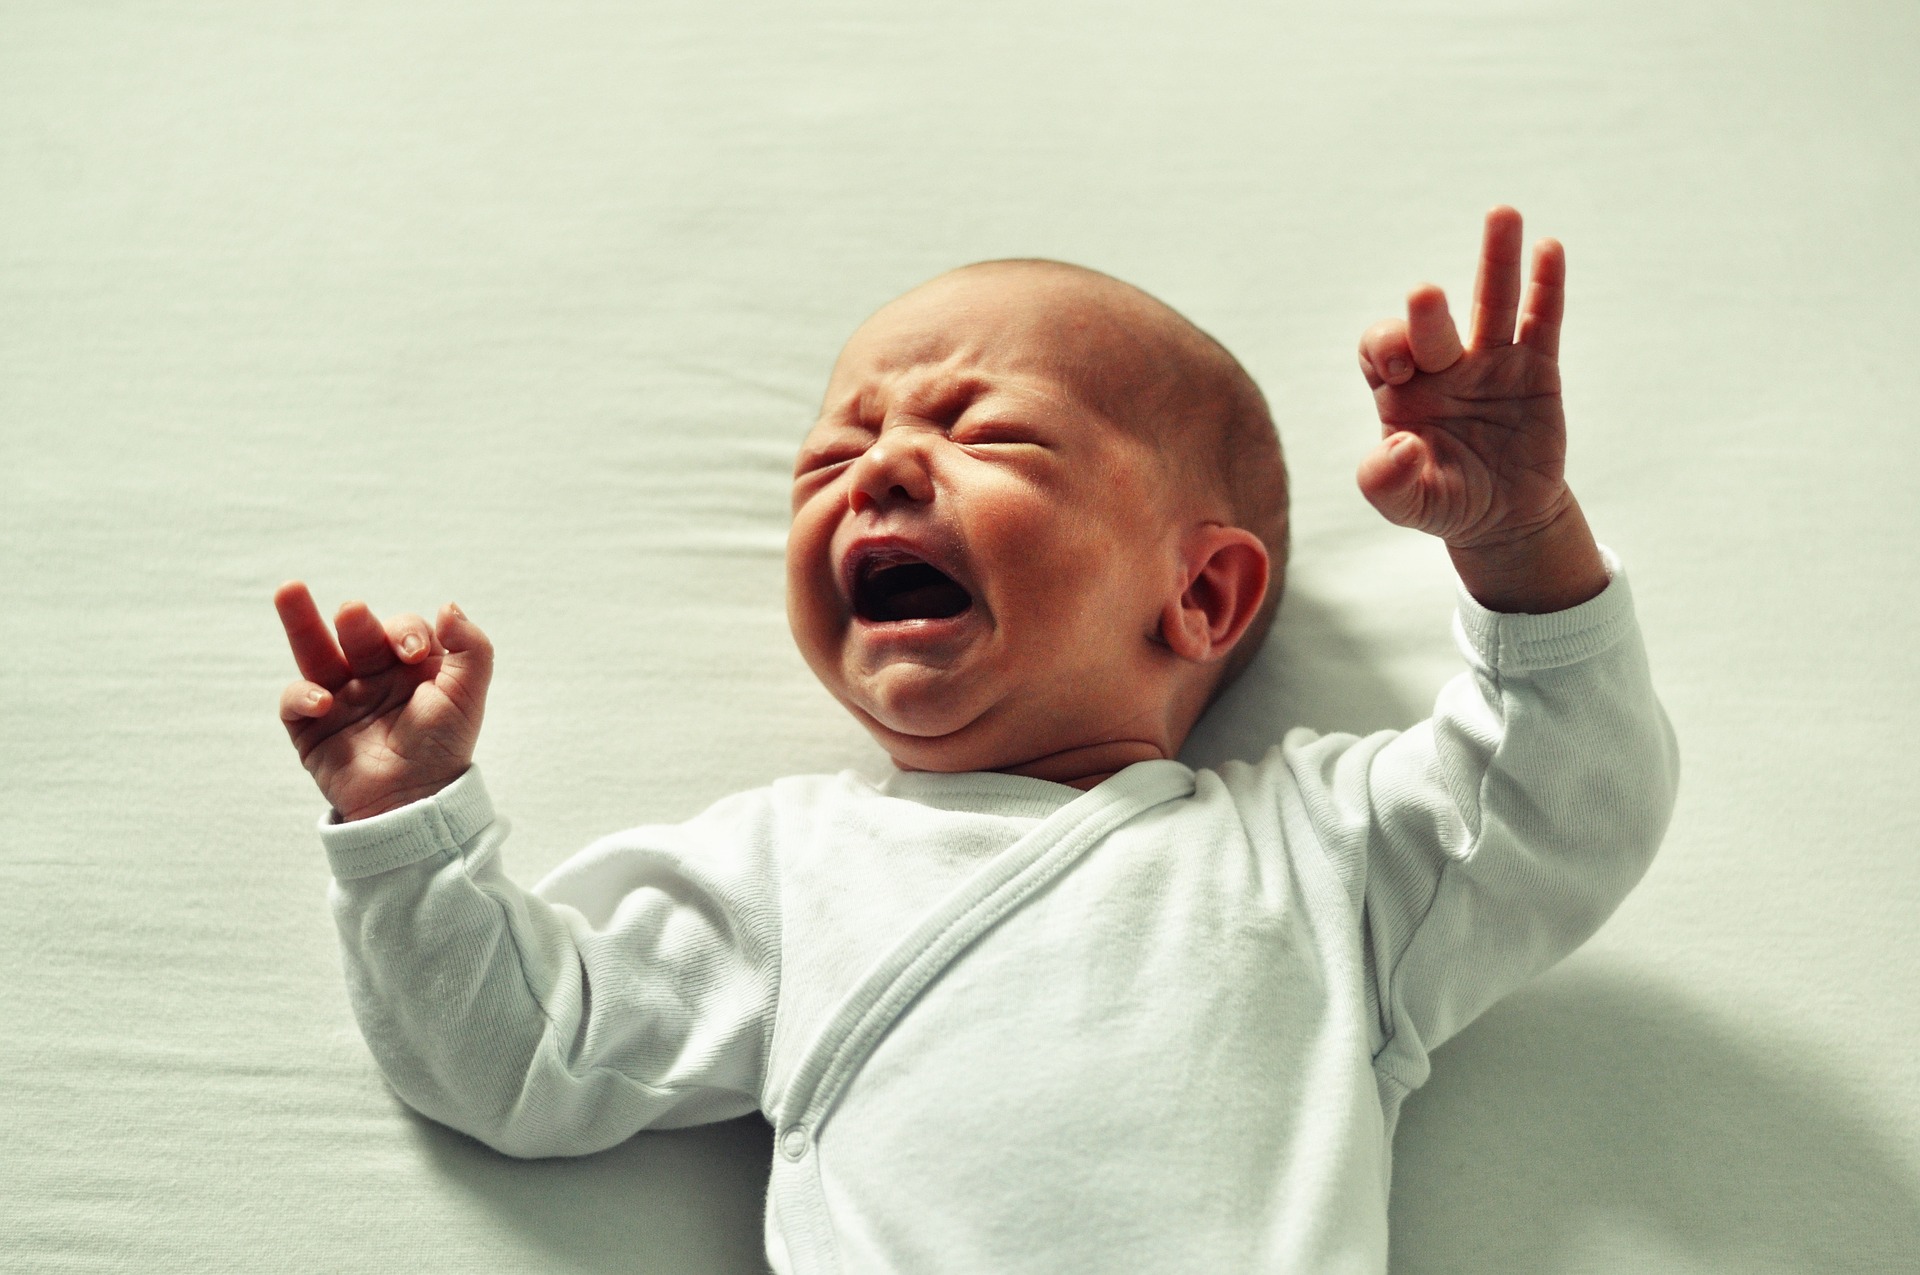 Why Does My Baby Cry? 5 Things You Should Know